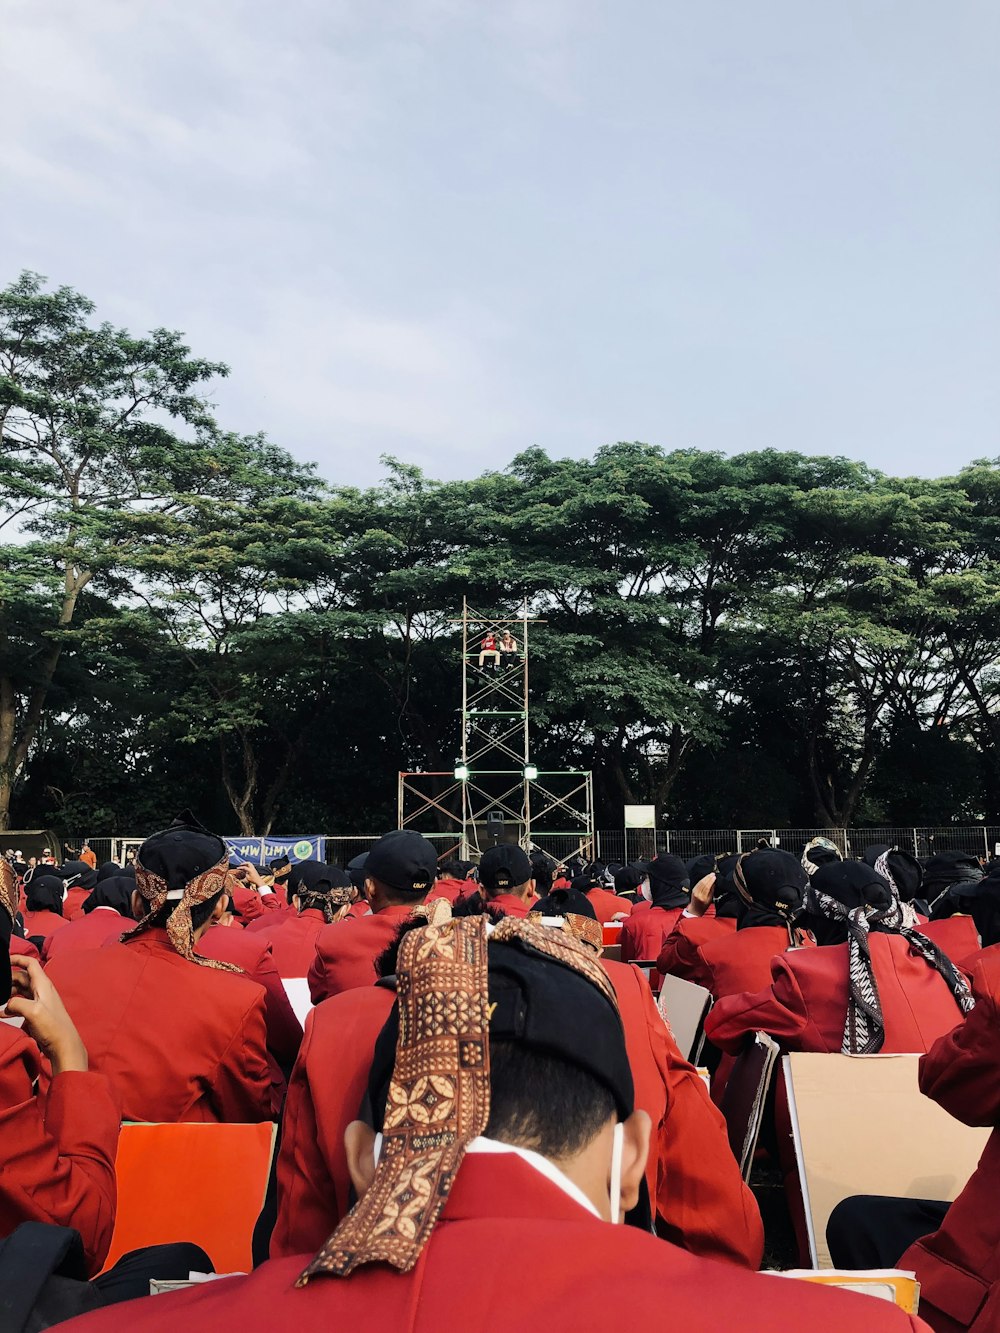 a large group of people in red graduation gowns